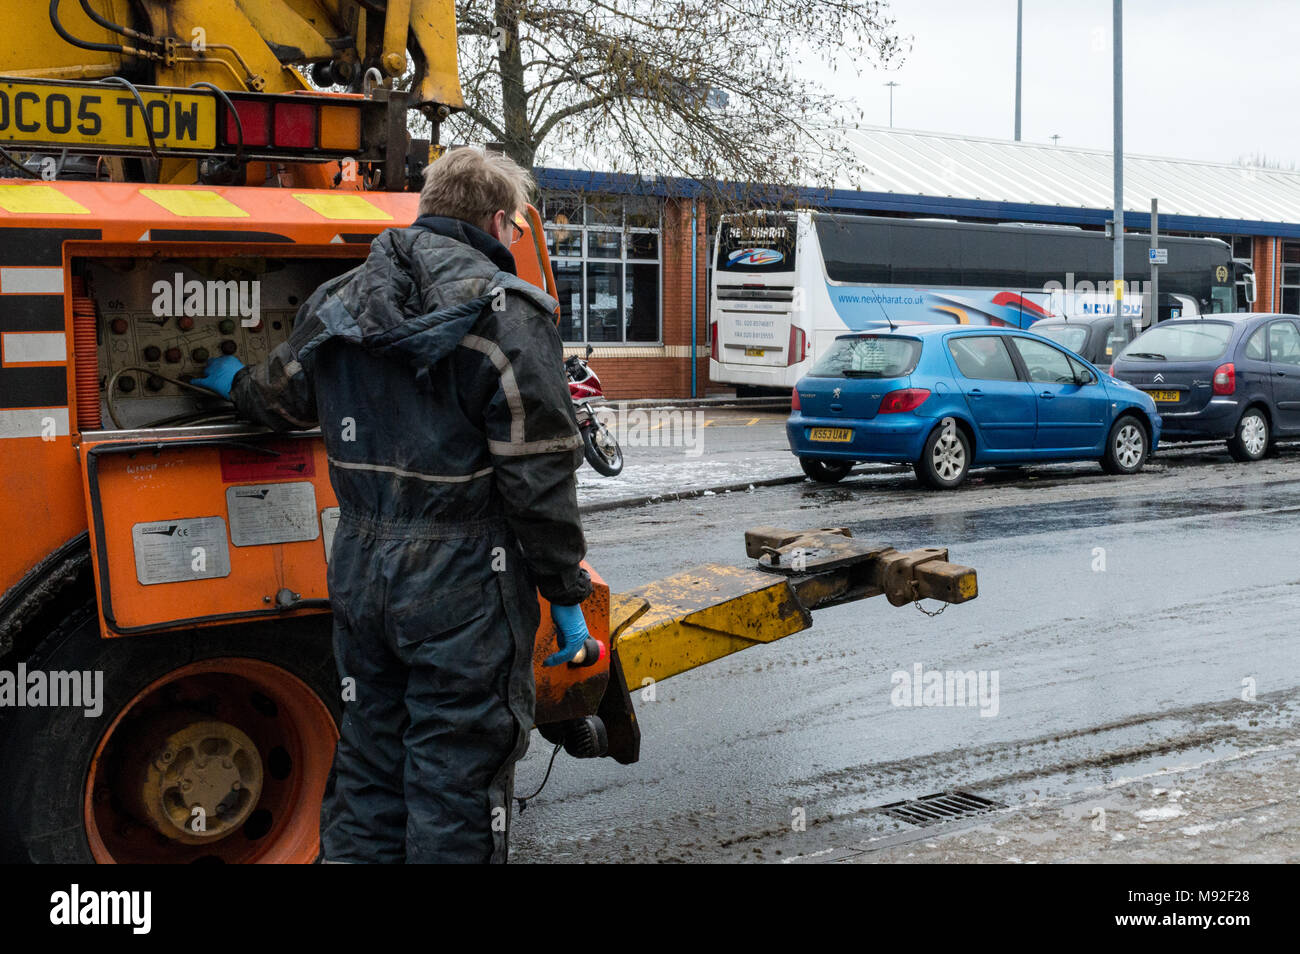 Mechanic operating the rear tow bar on his truck, collecting a National Express coach with gear problems in Pool Meadow Bus station in Coventry, UK Stock Photo